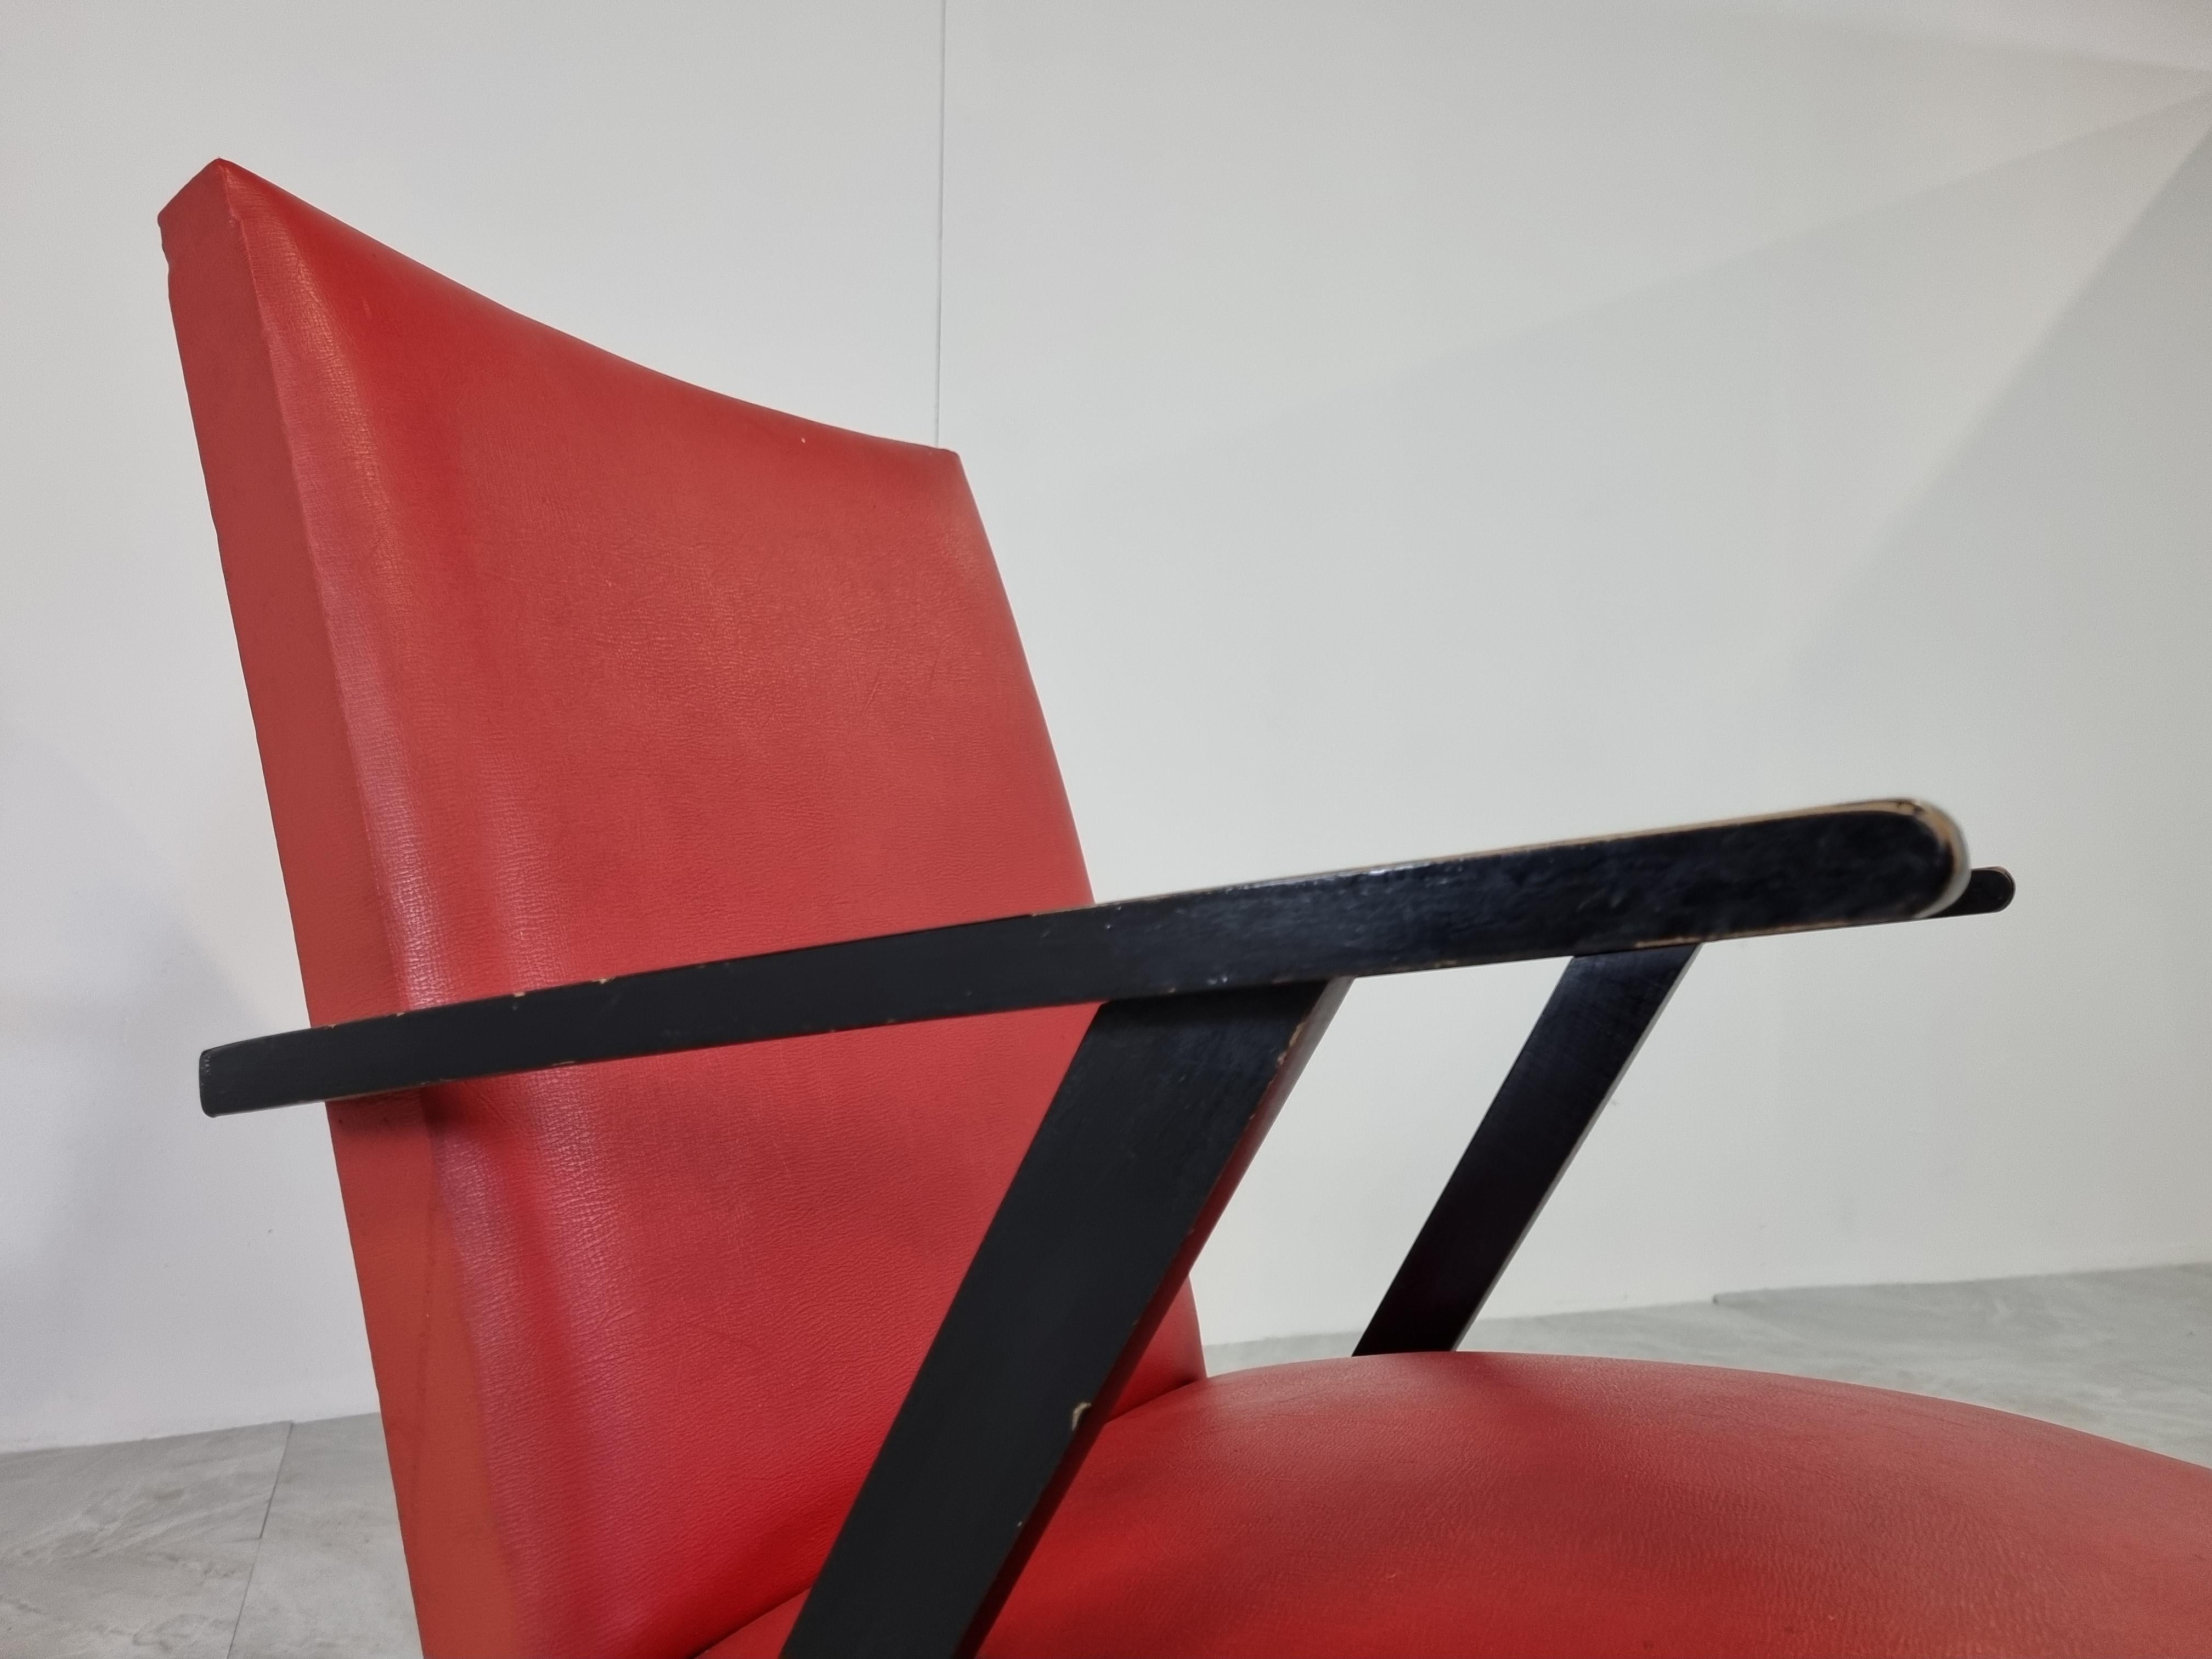 Pair of mid century armchairs in red skai (leatherette) upholstery and black lacquered wooden armrests and legs.

Nice striking red colour.

Good original condition

1960s - Belgium

Dimensions:
Height: 86cm/33.85